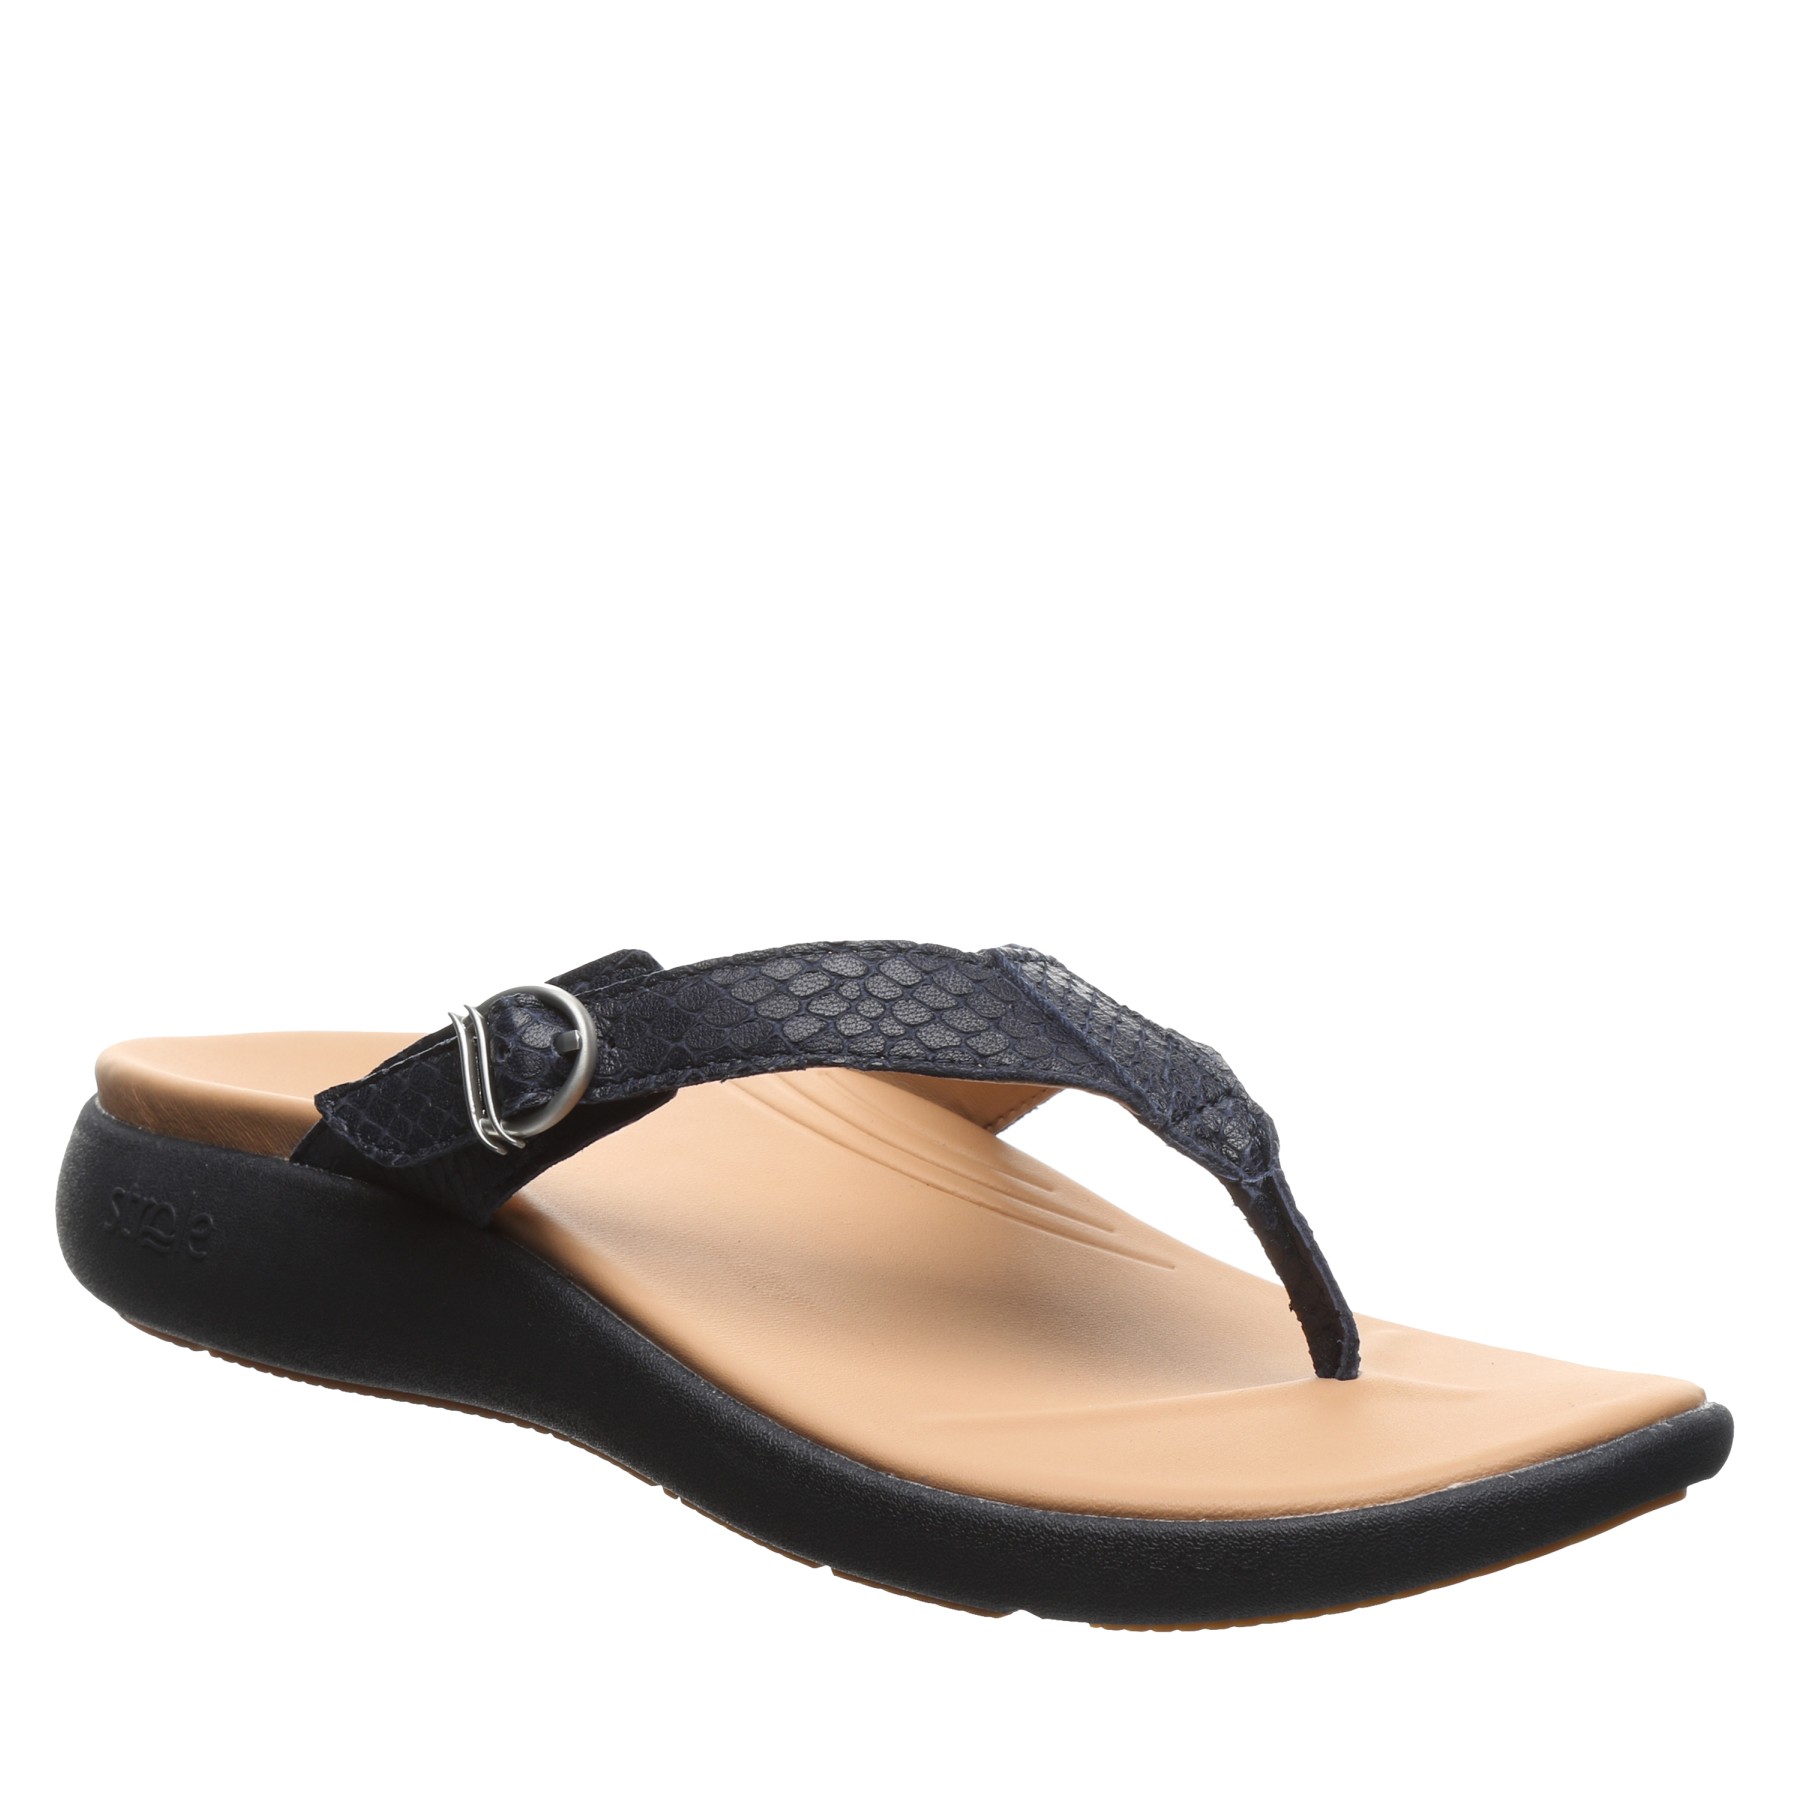 Strole Coaster - Women's Supportive Healthy Walking Sandal - Free Shipping